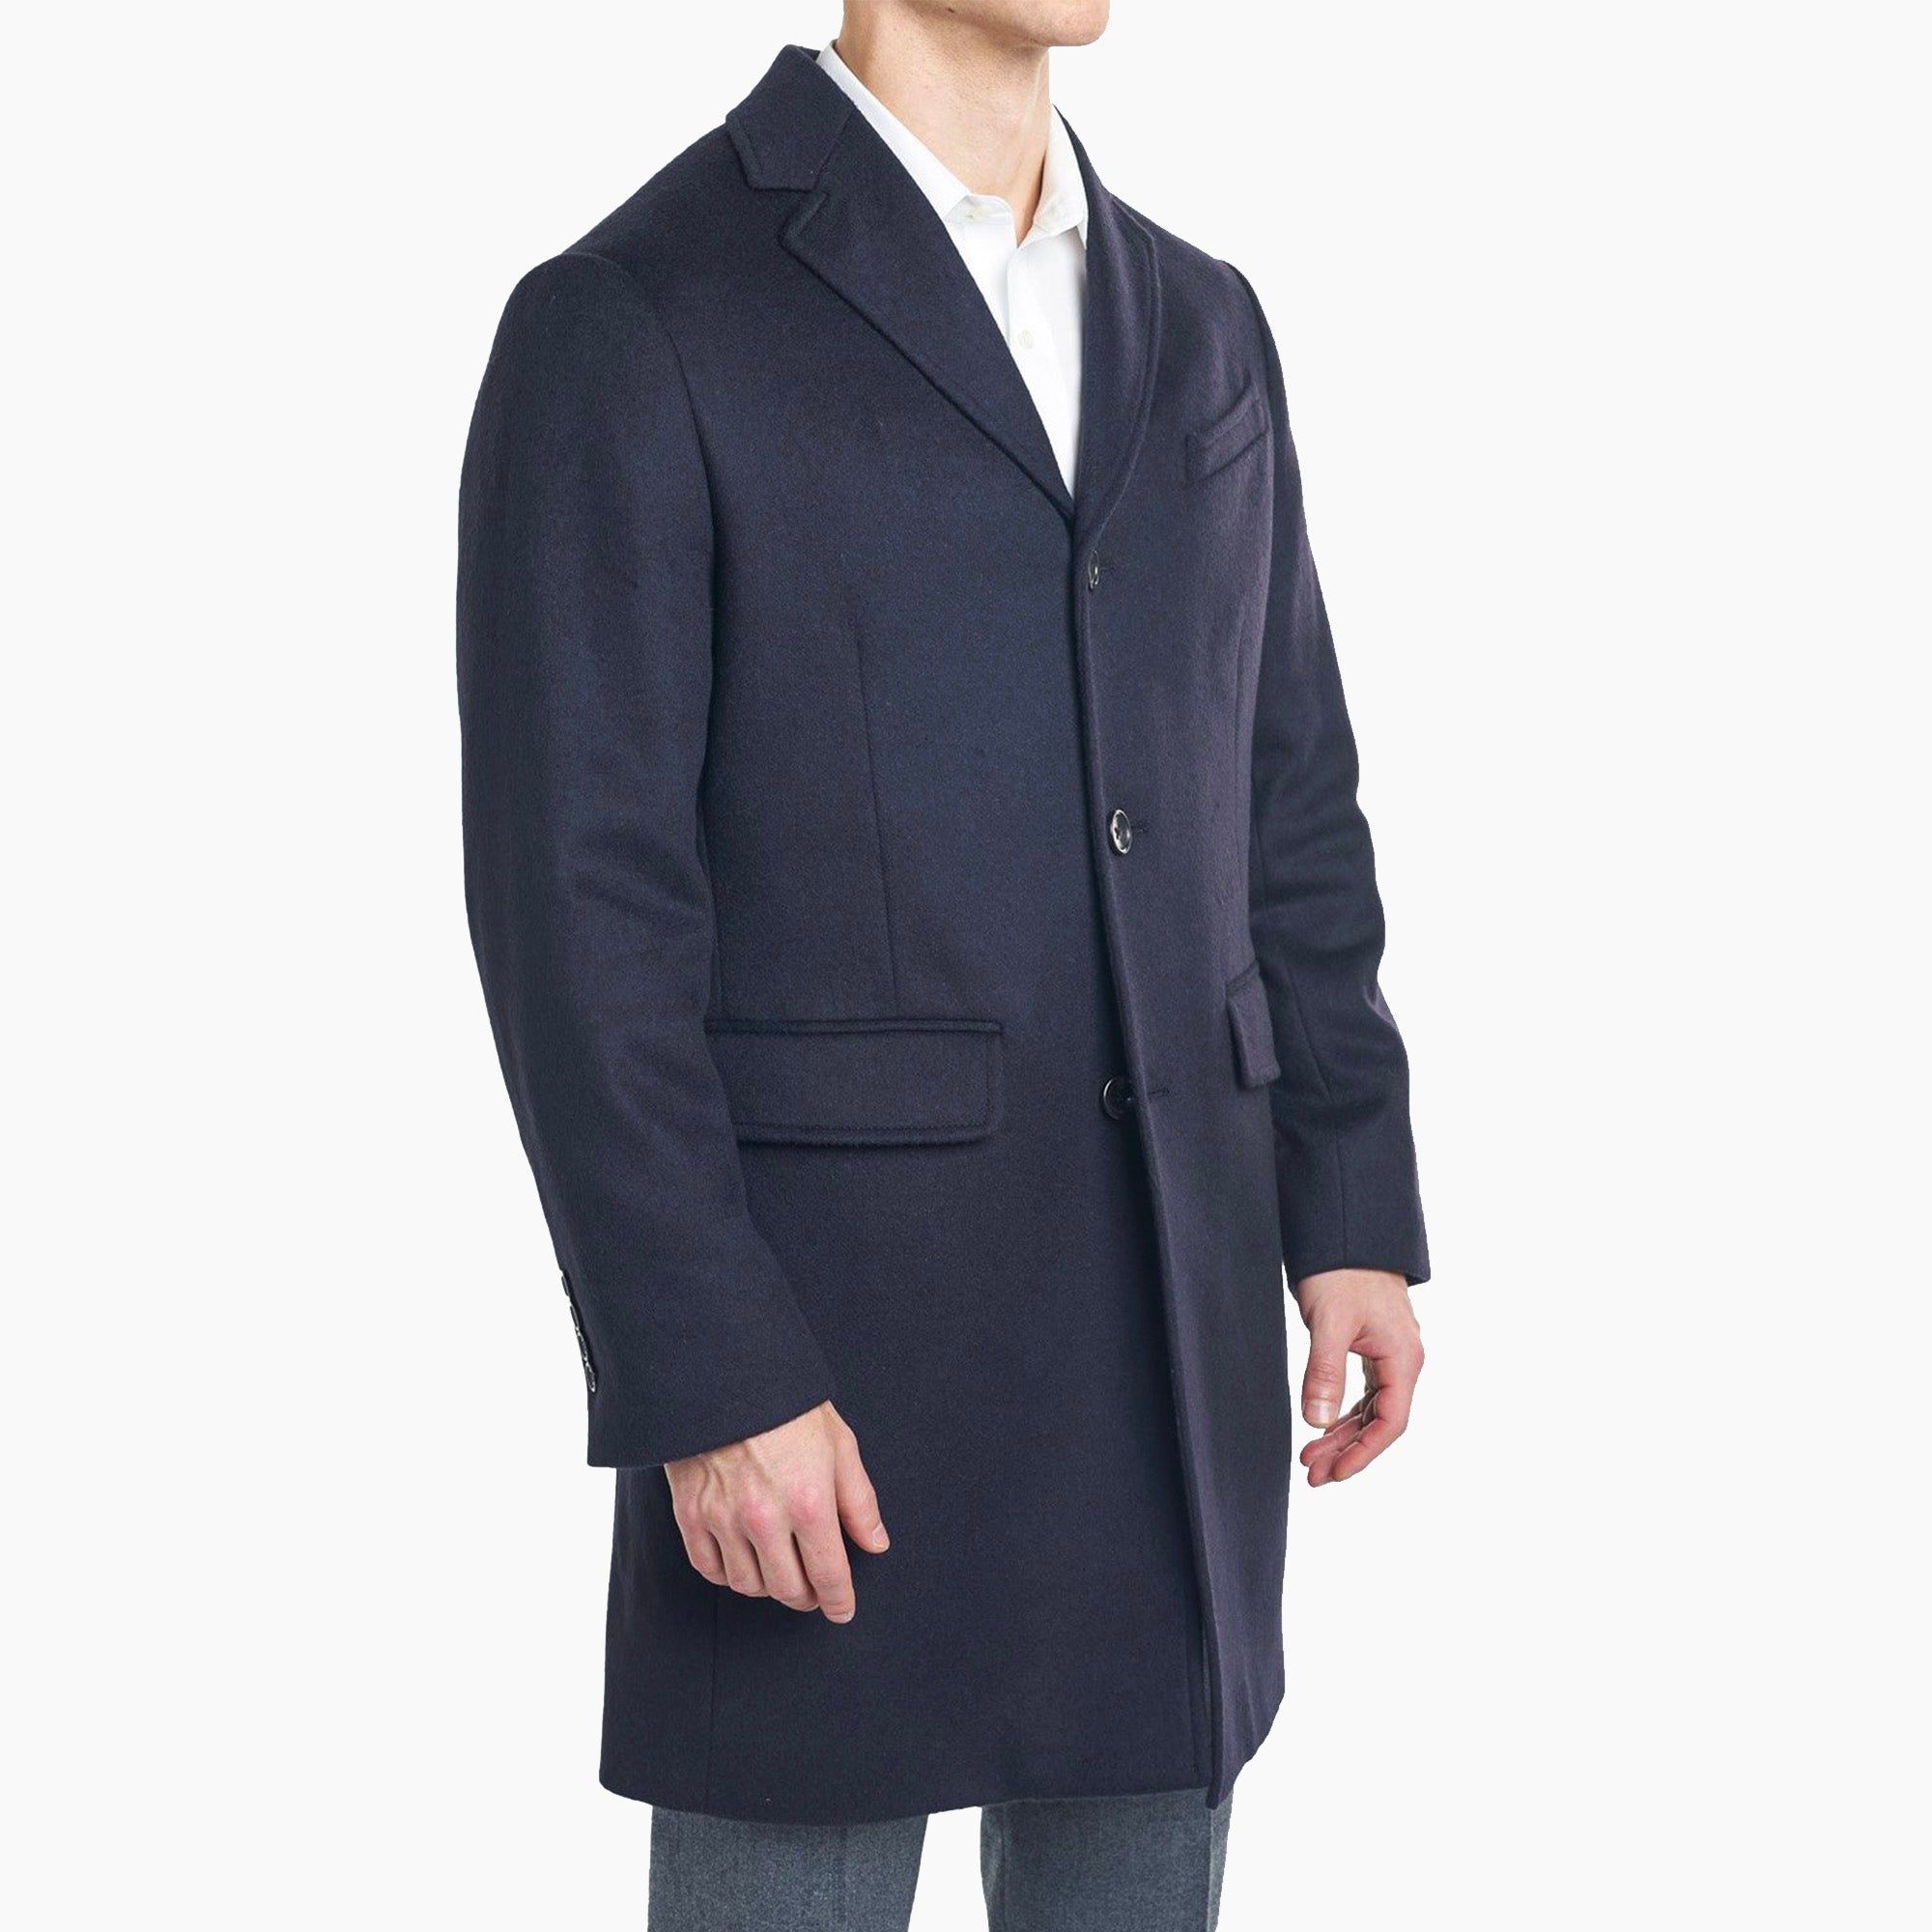 Fulton Wool Cashmere Topcoat - Navy